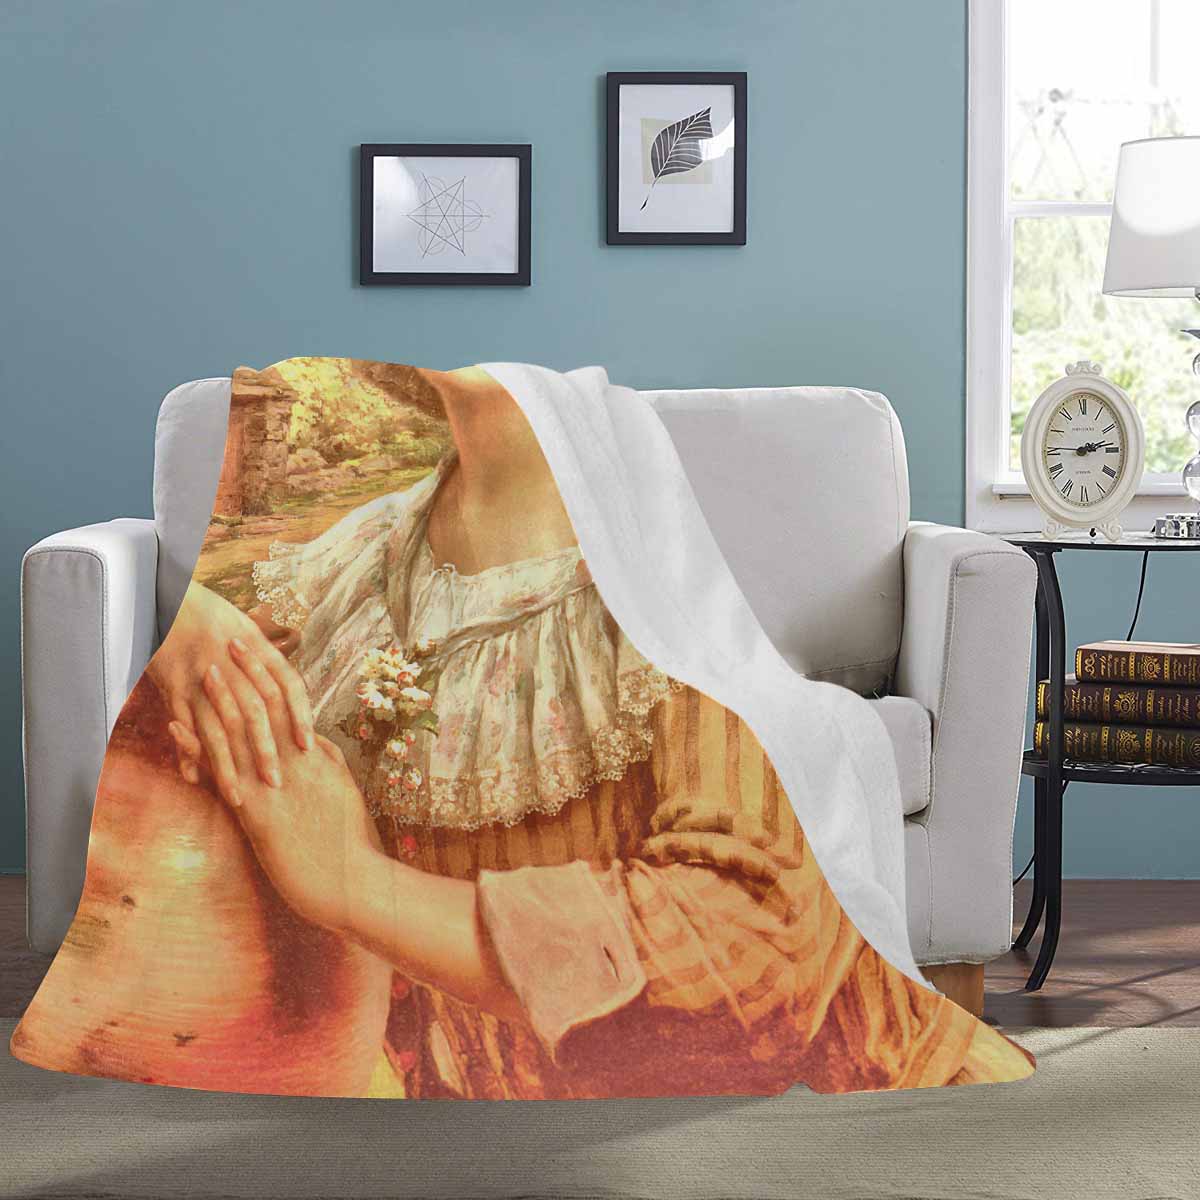 Victorian Lady Design BLANKET, LARGE 60 in x 80 in, COUNTRY SPRING